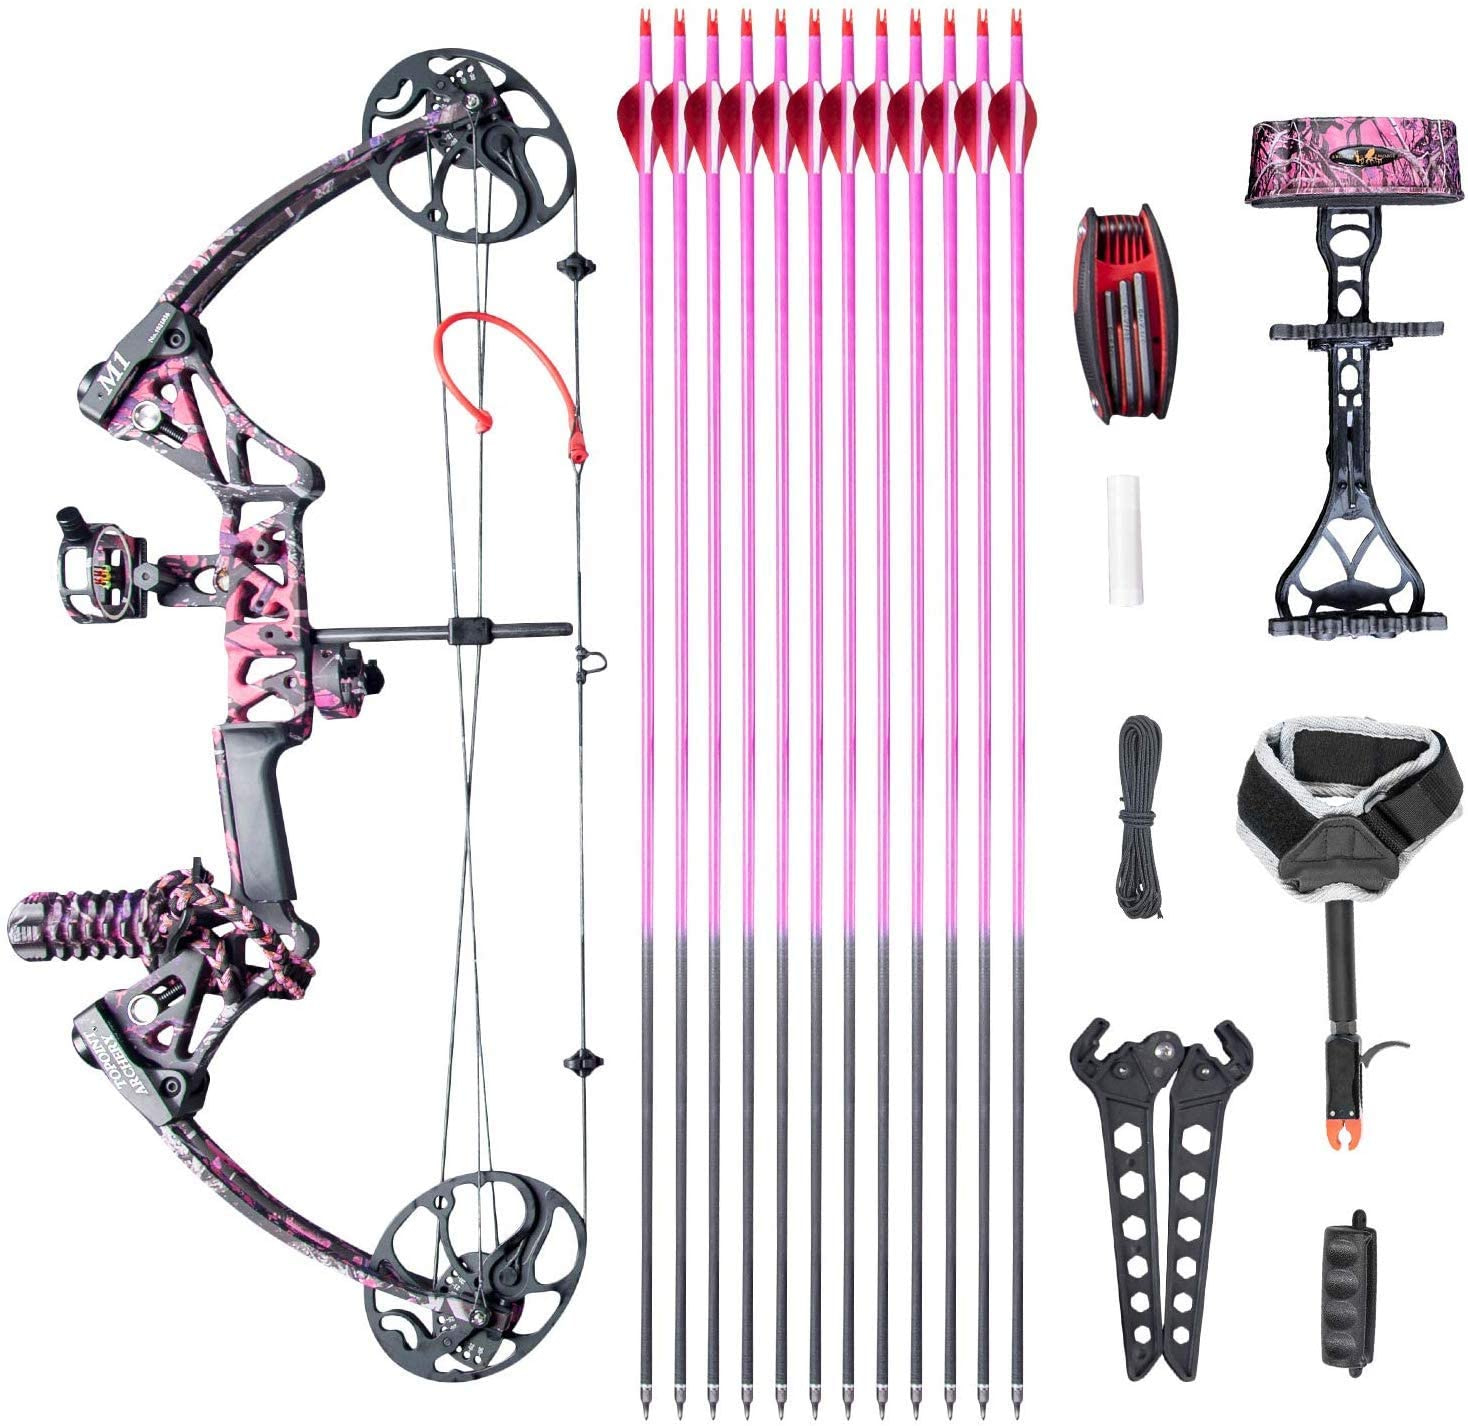 MKING Compound Bow for Women